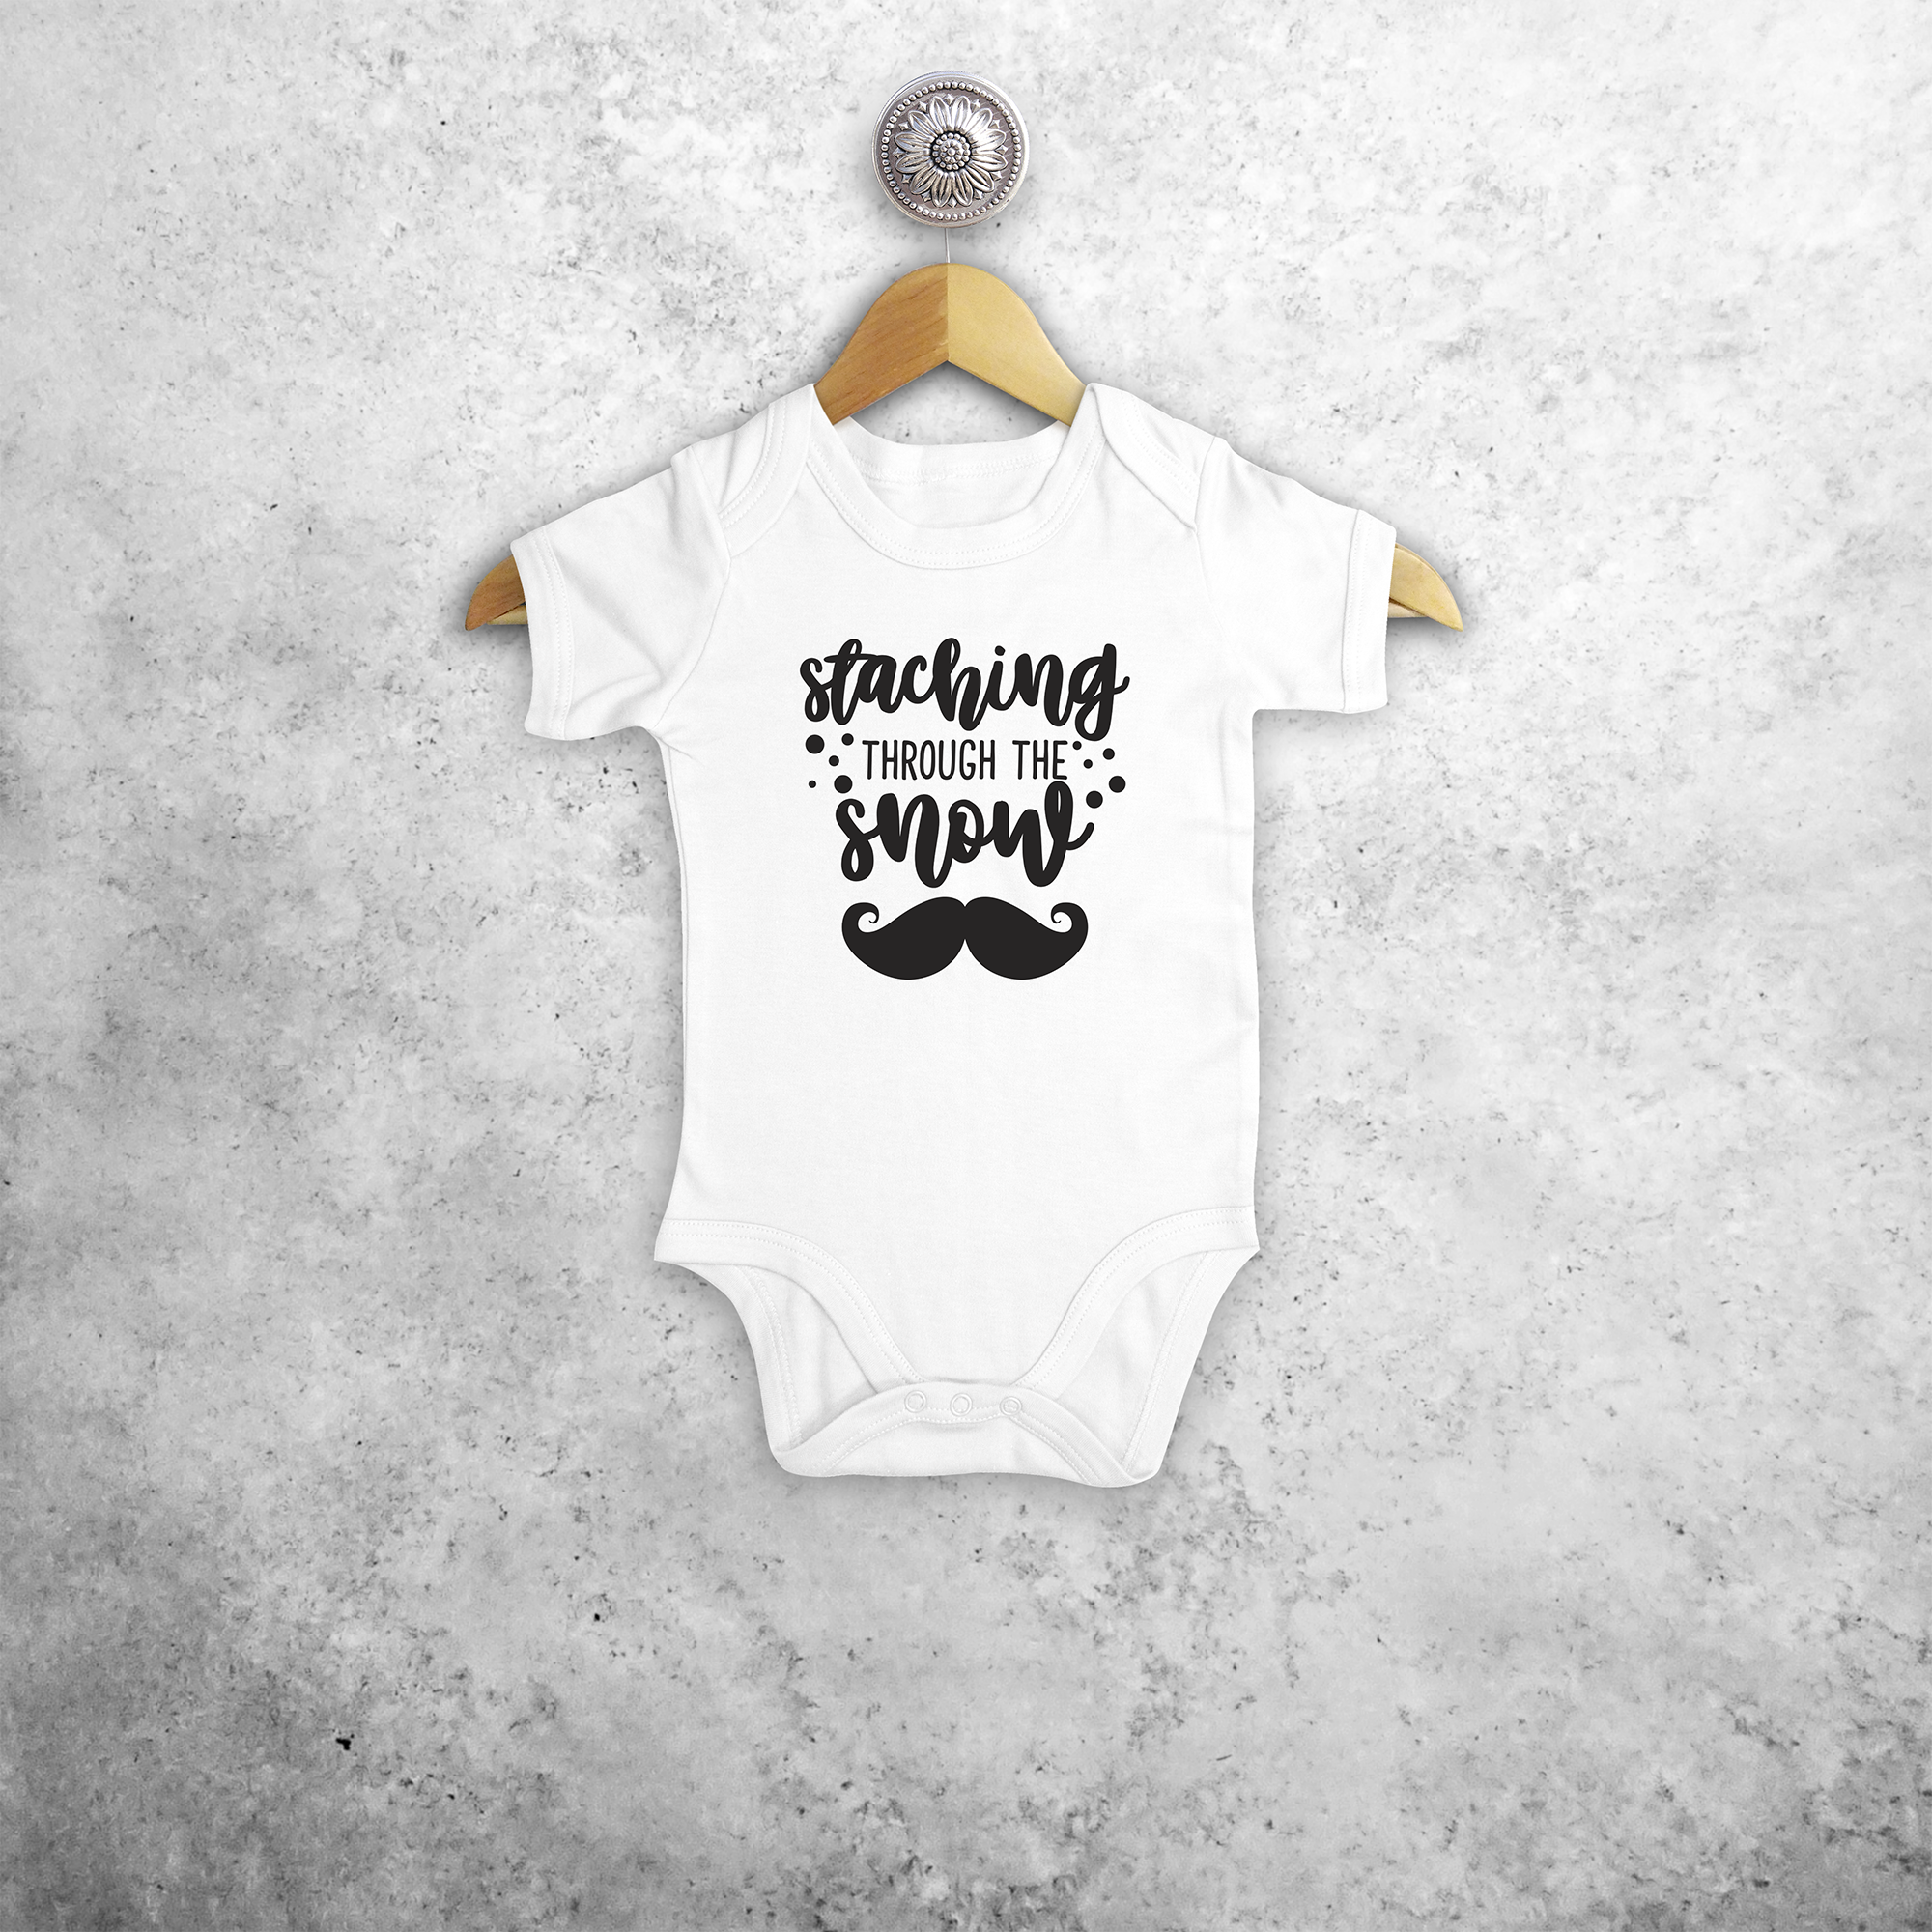 Baby or toddler bodysuit with short sleeves, with ‘Staching through the snow’ print by KMLeon.